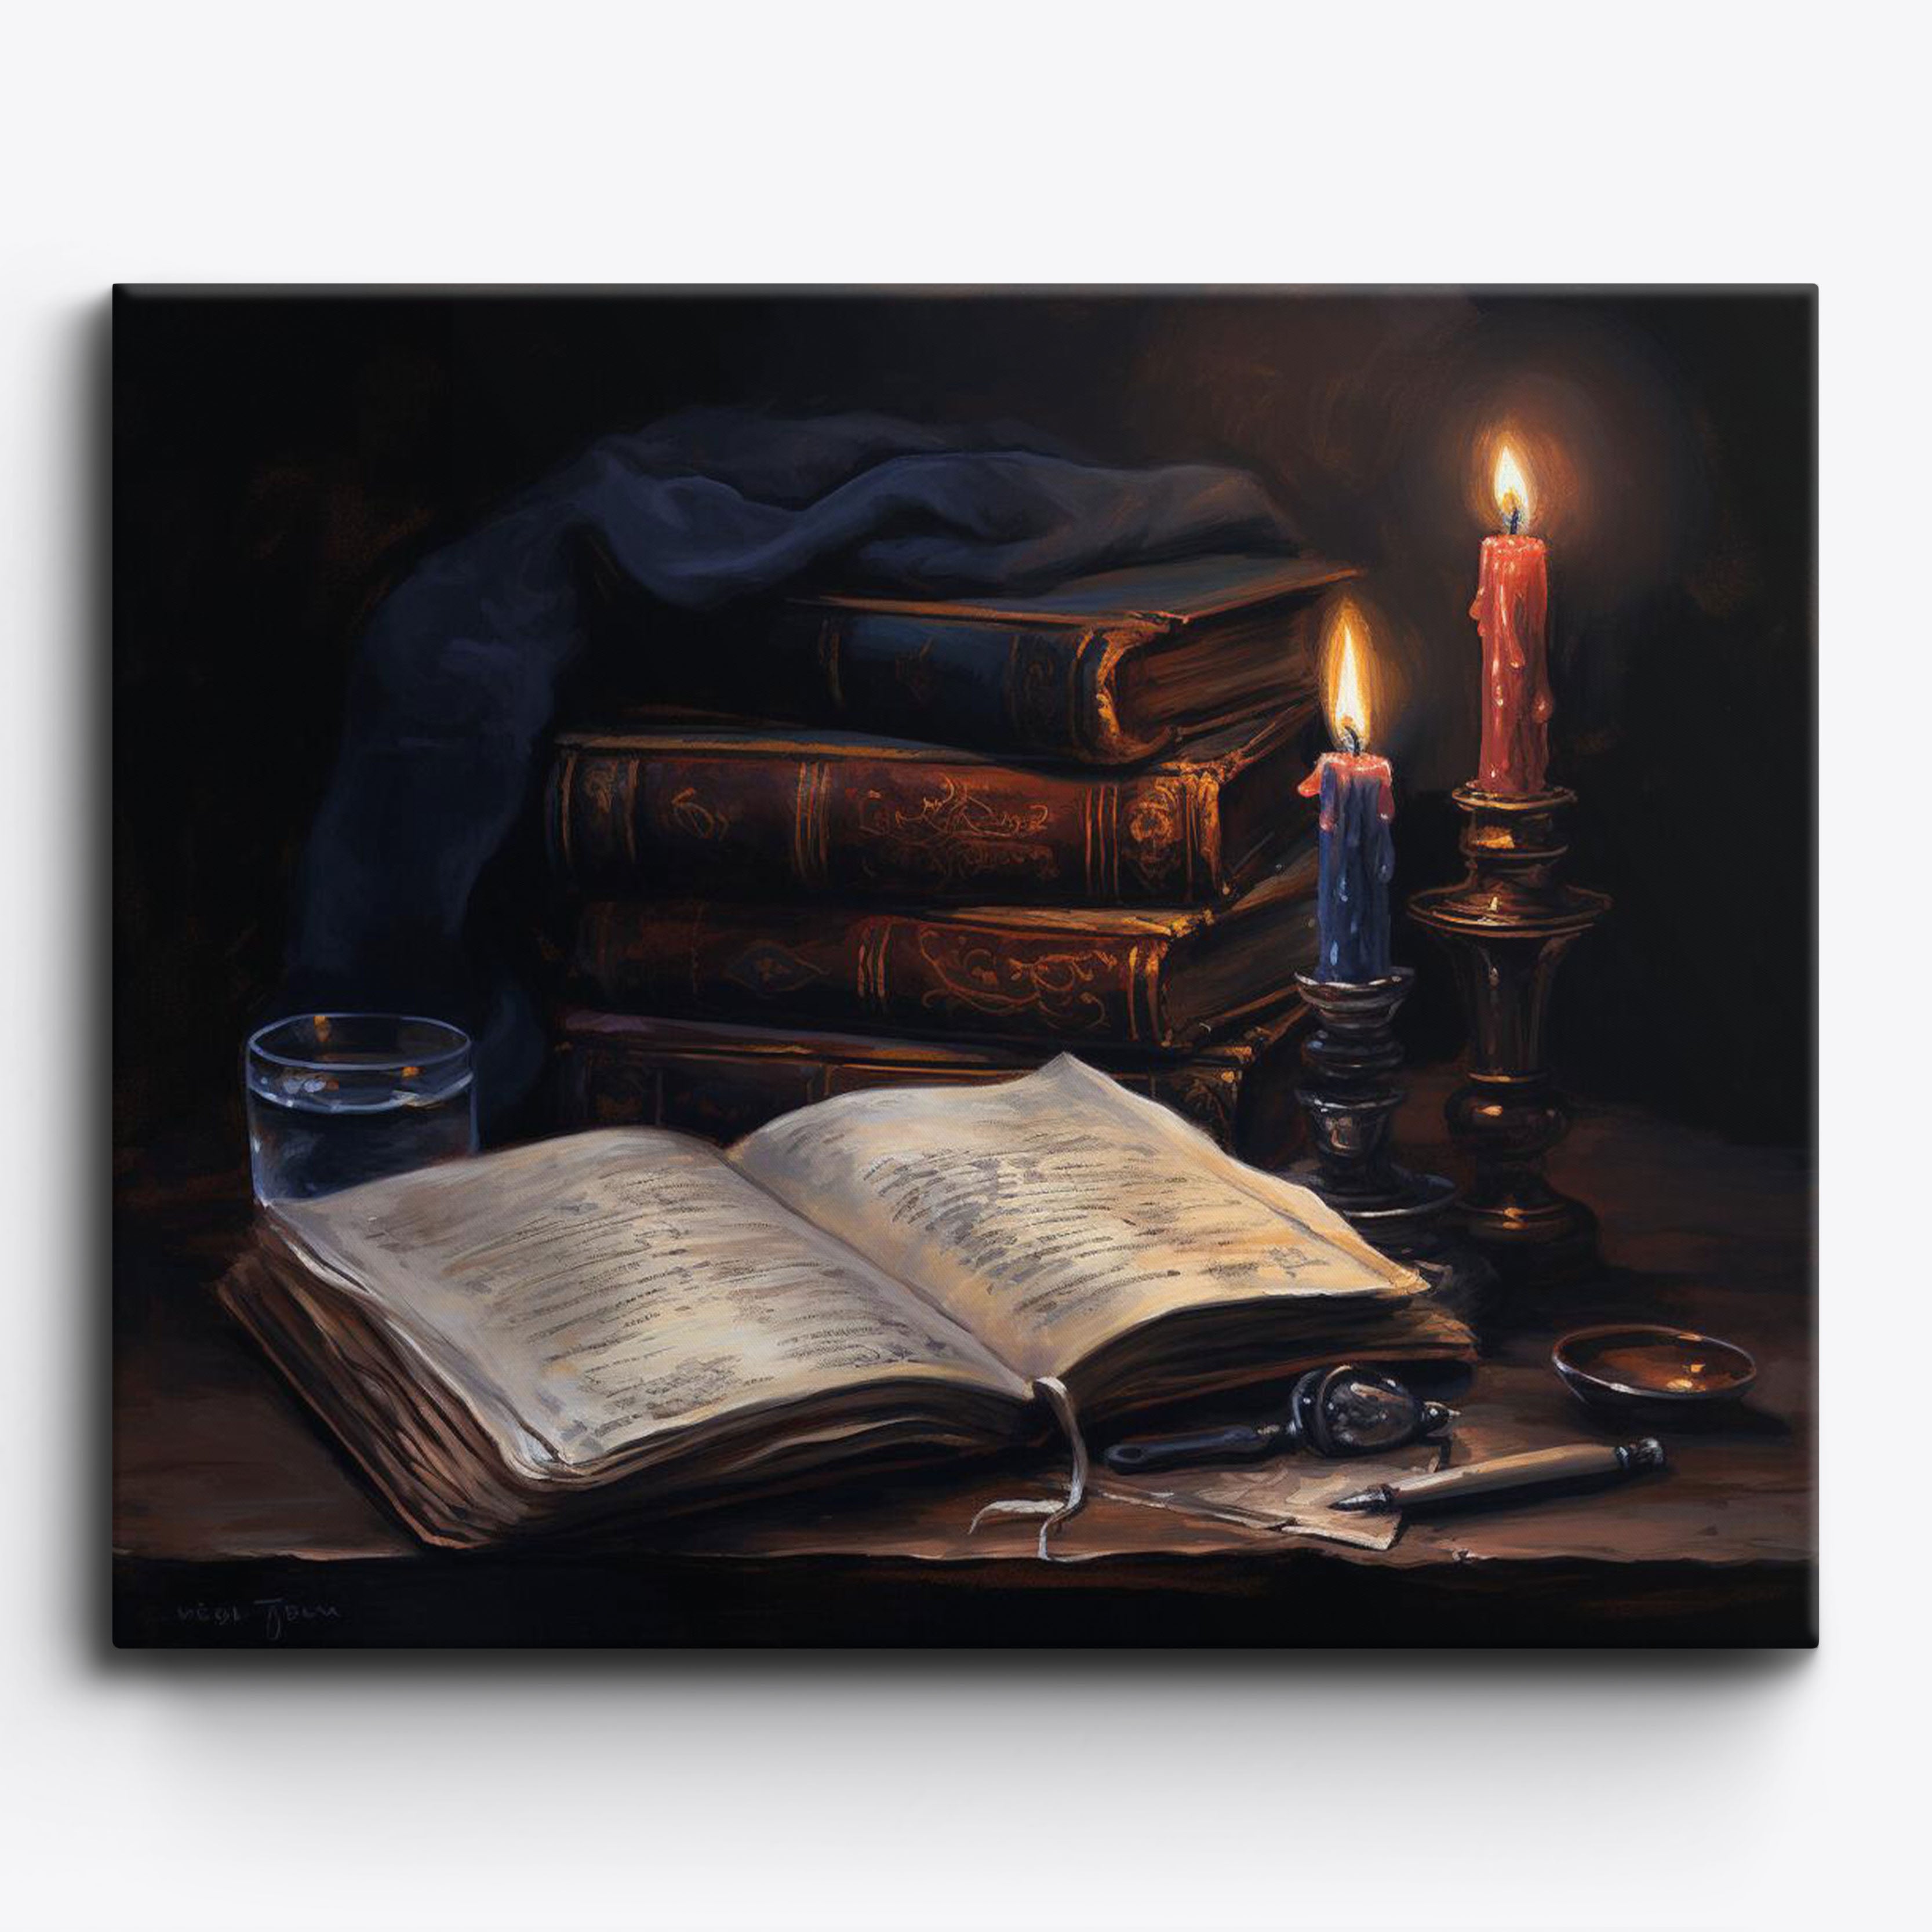 Old Books by Candlelight Step by Step Acrylic Painting on Canvas